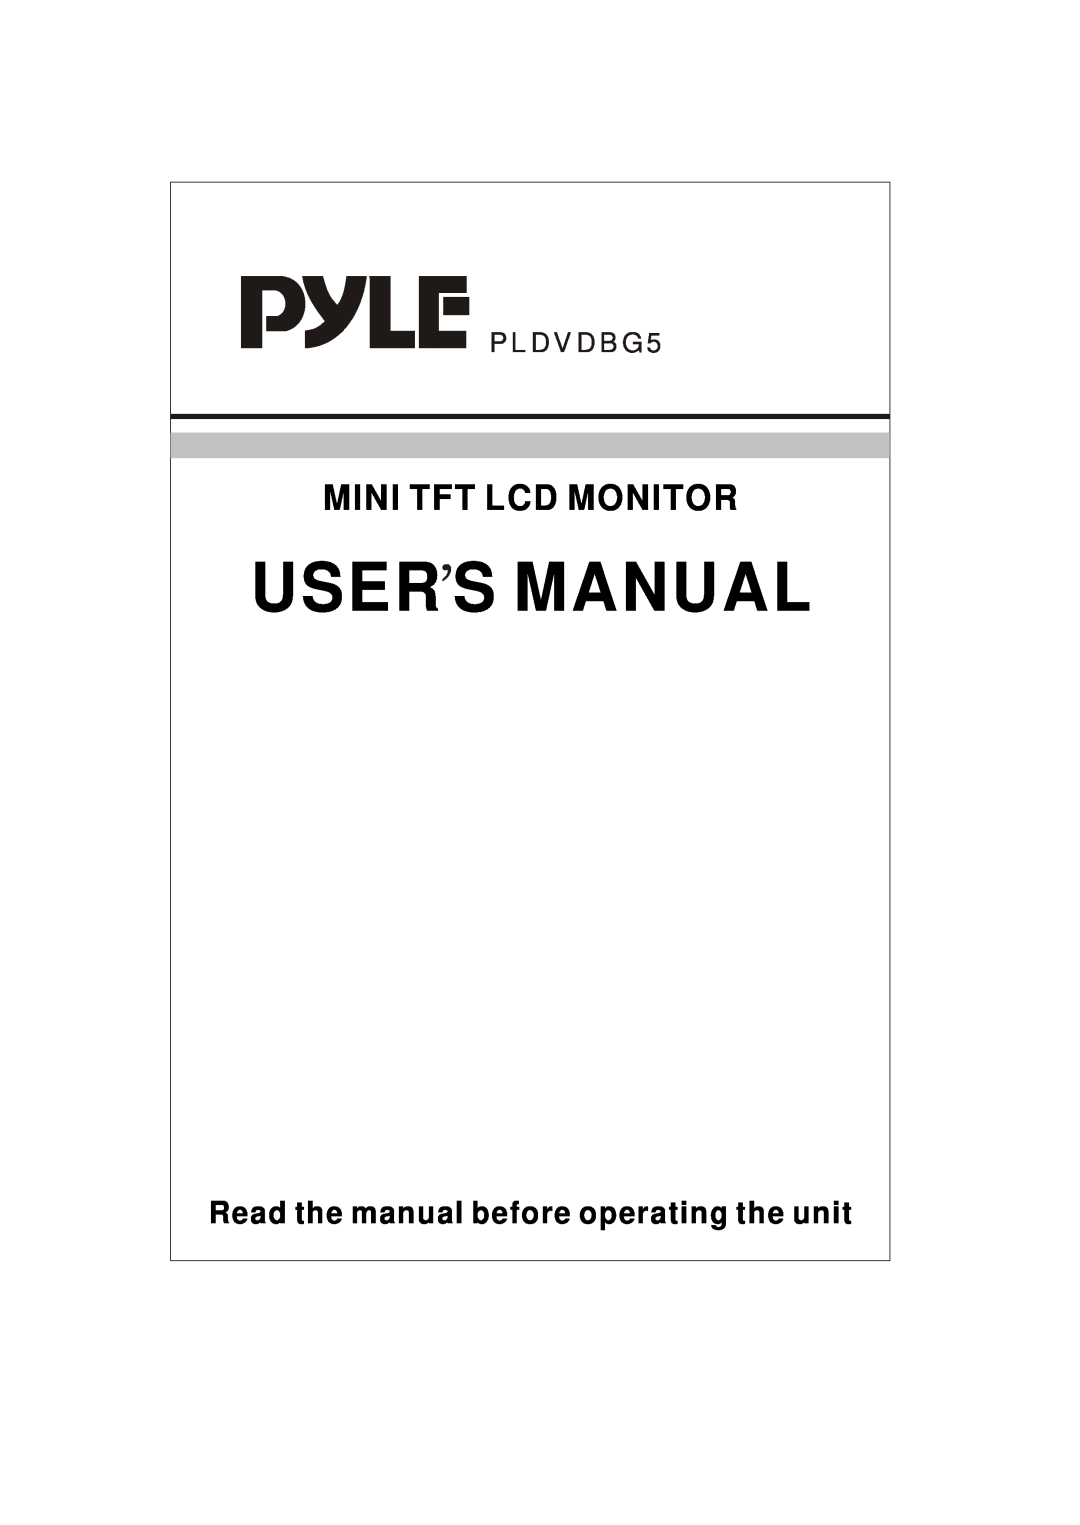 PYLE Audio PLDVDBG5 user manual Users Manual, Mini Tft Lcd Monitor, Read the manual before operating the unit 